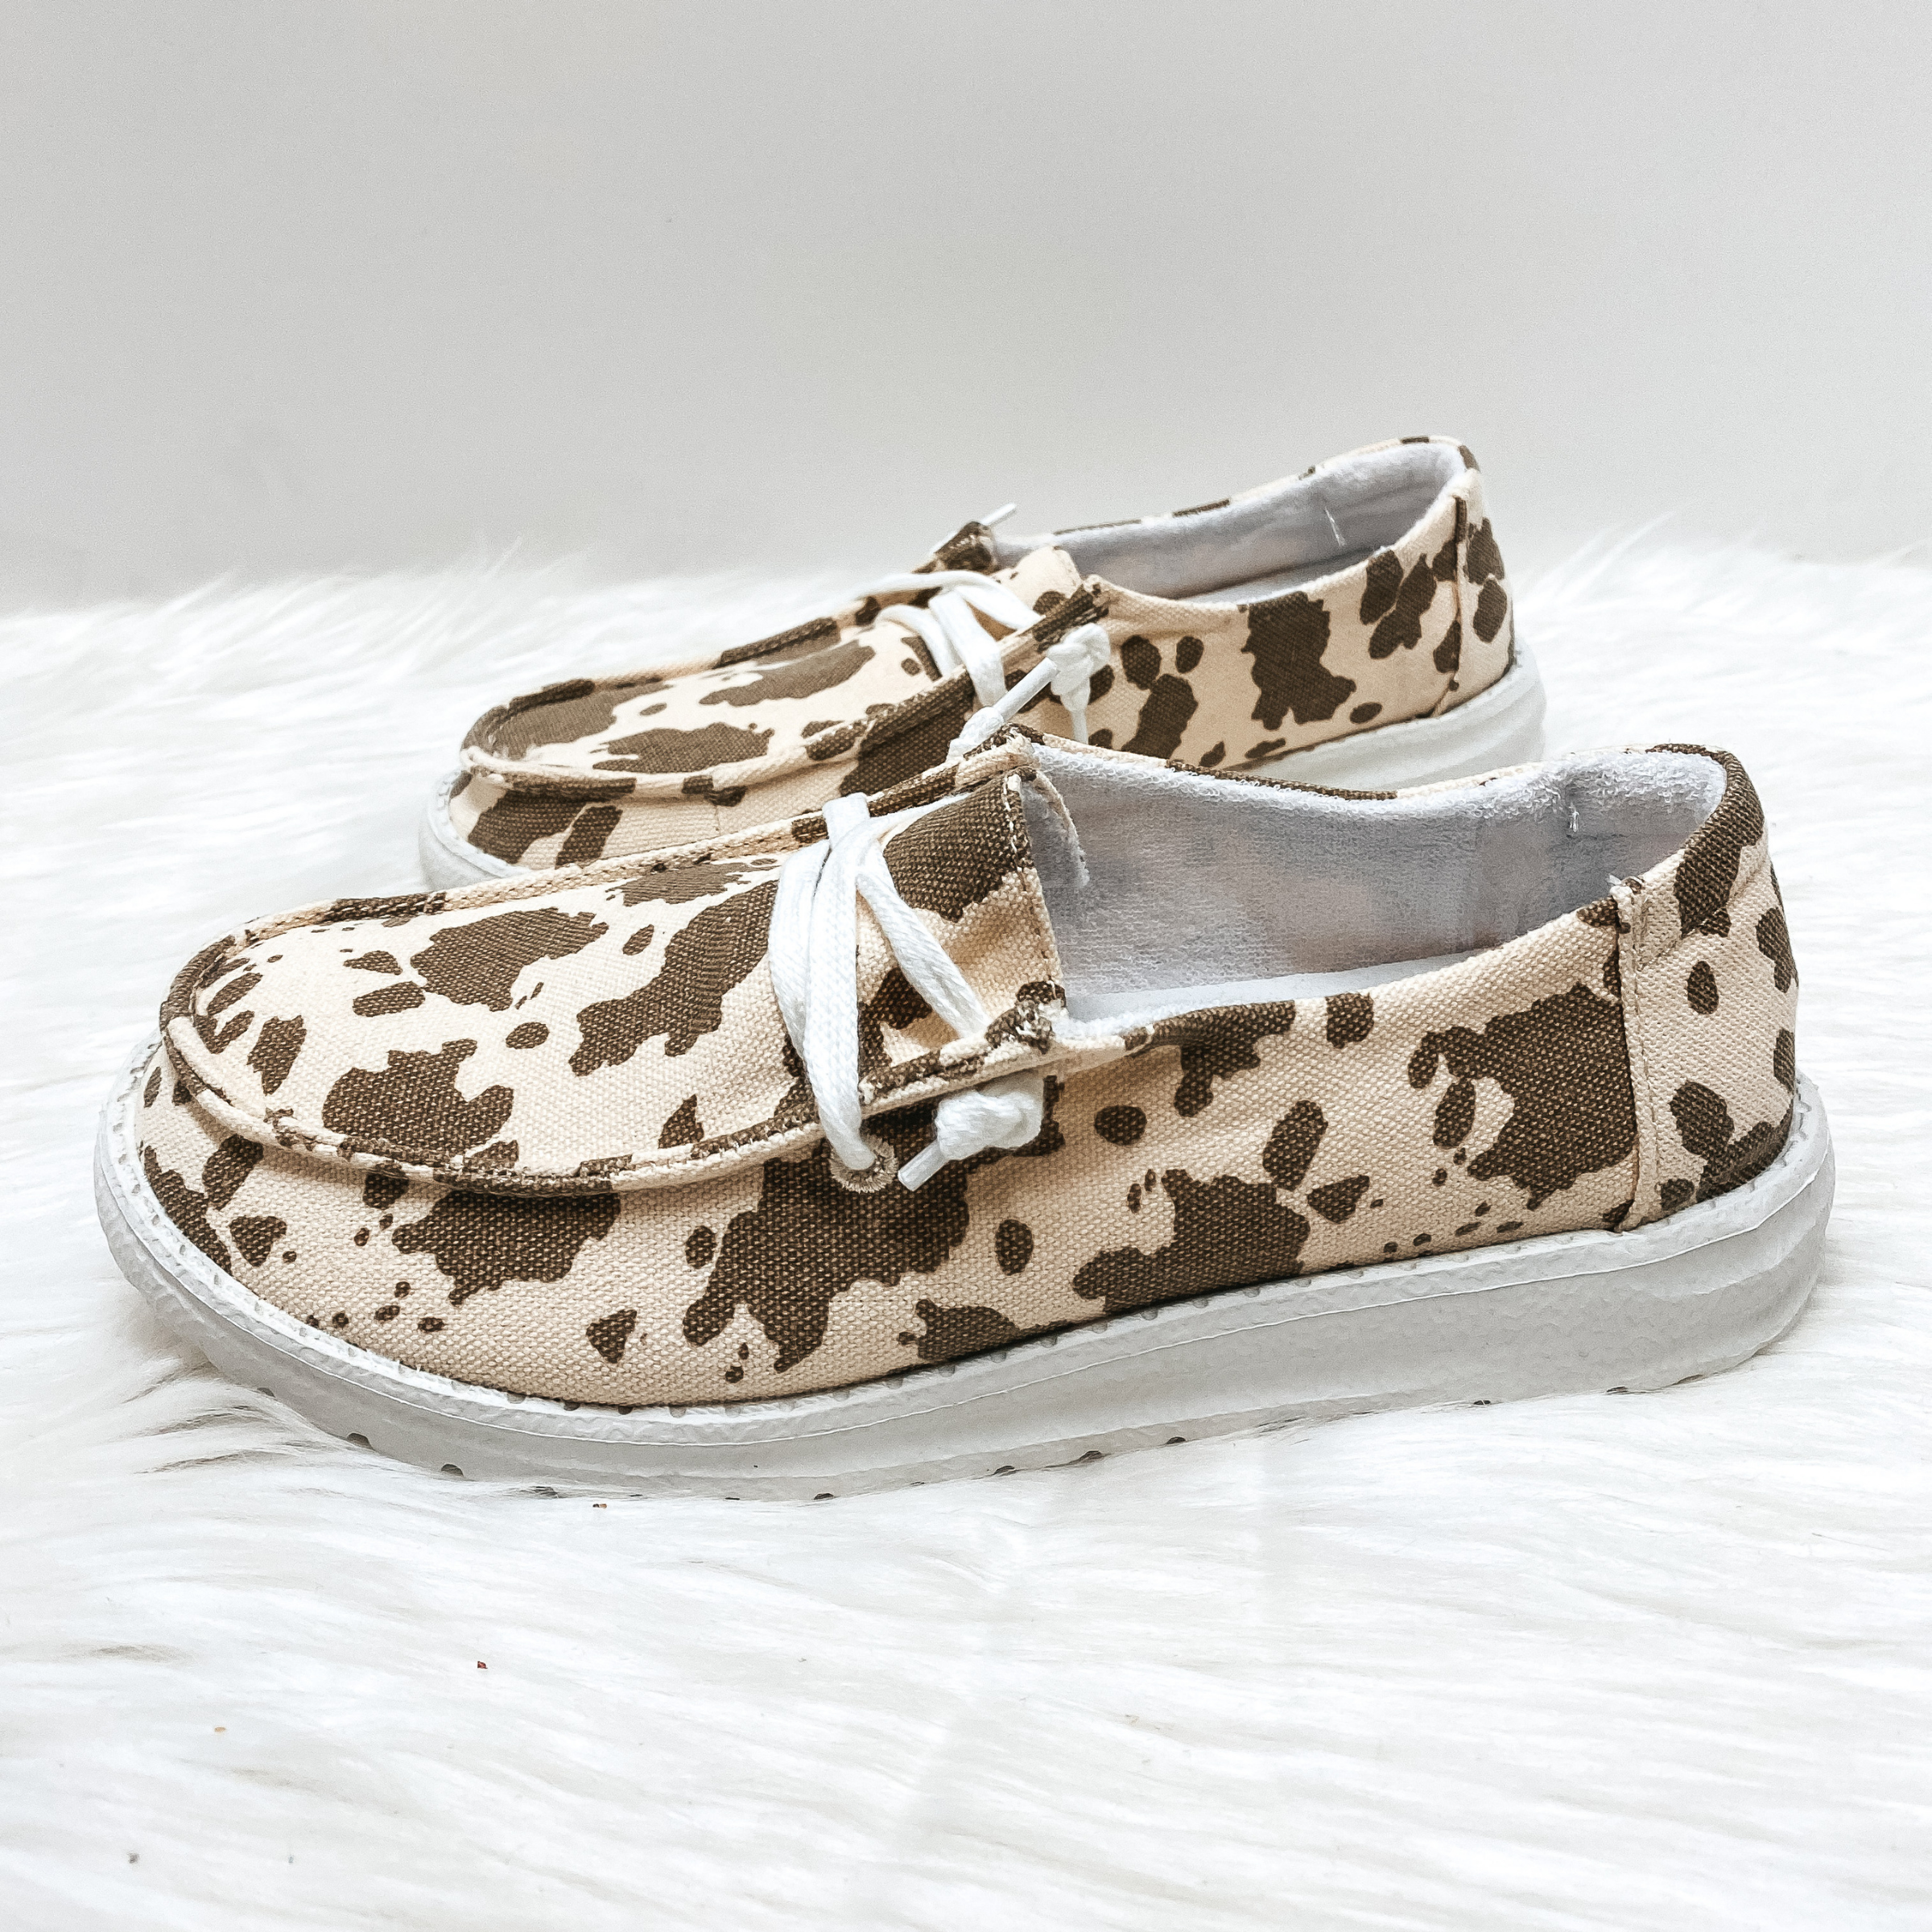 Very G | Have To Run Cow Print Slip On Loafers with Laces in Tan - Giddy Up Glamour Boutique